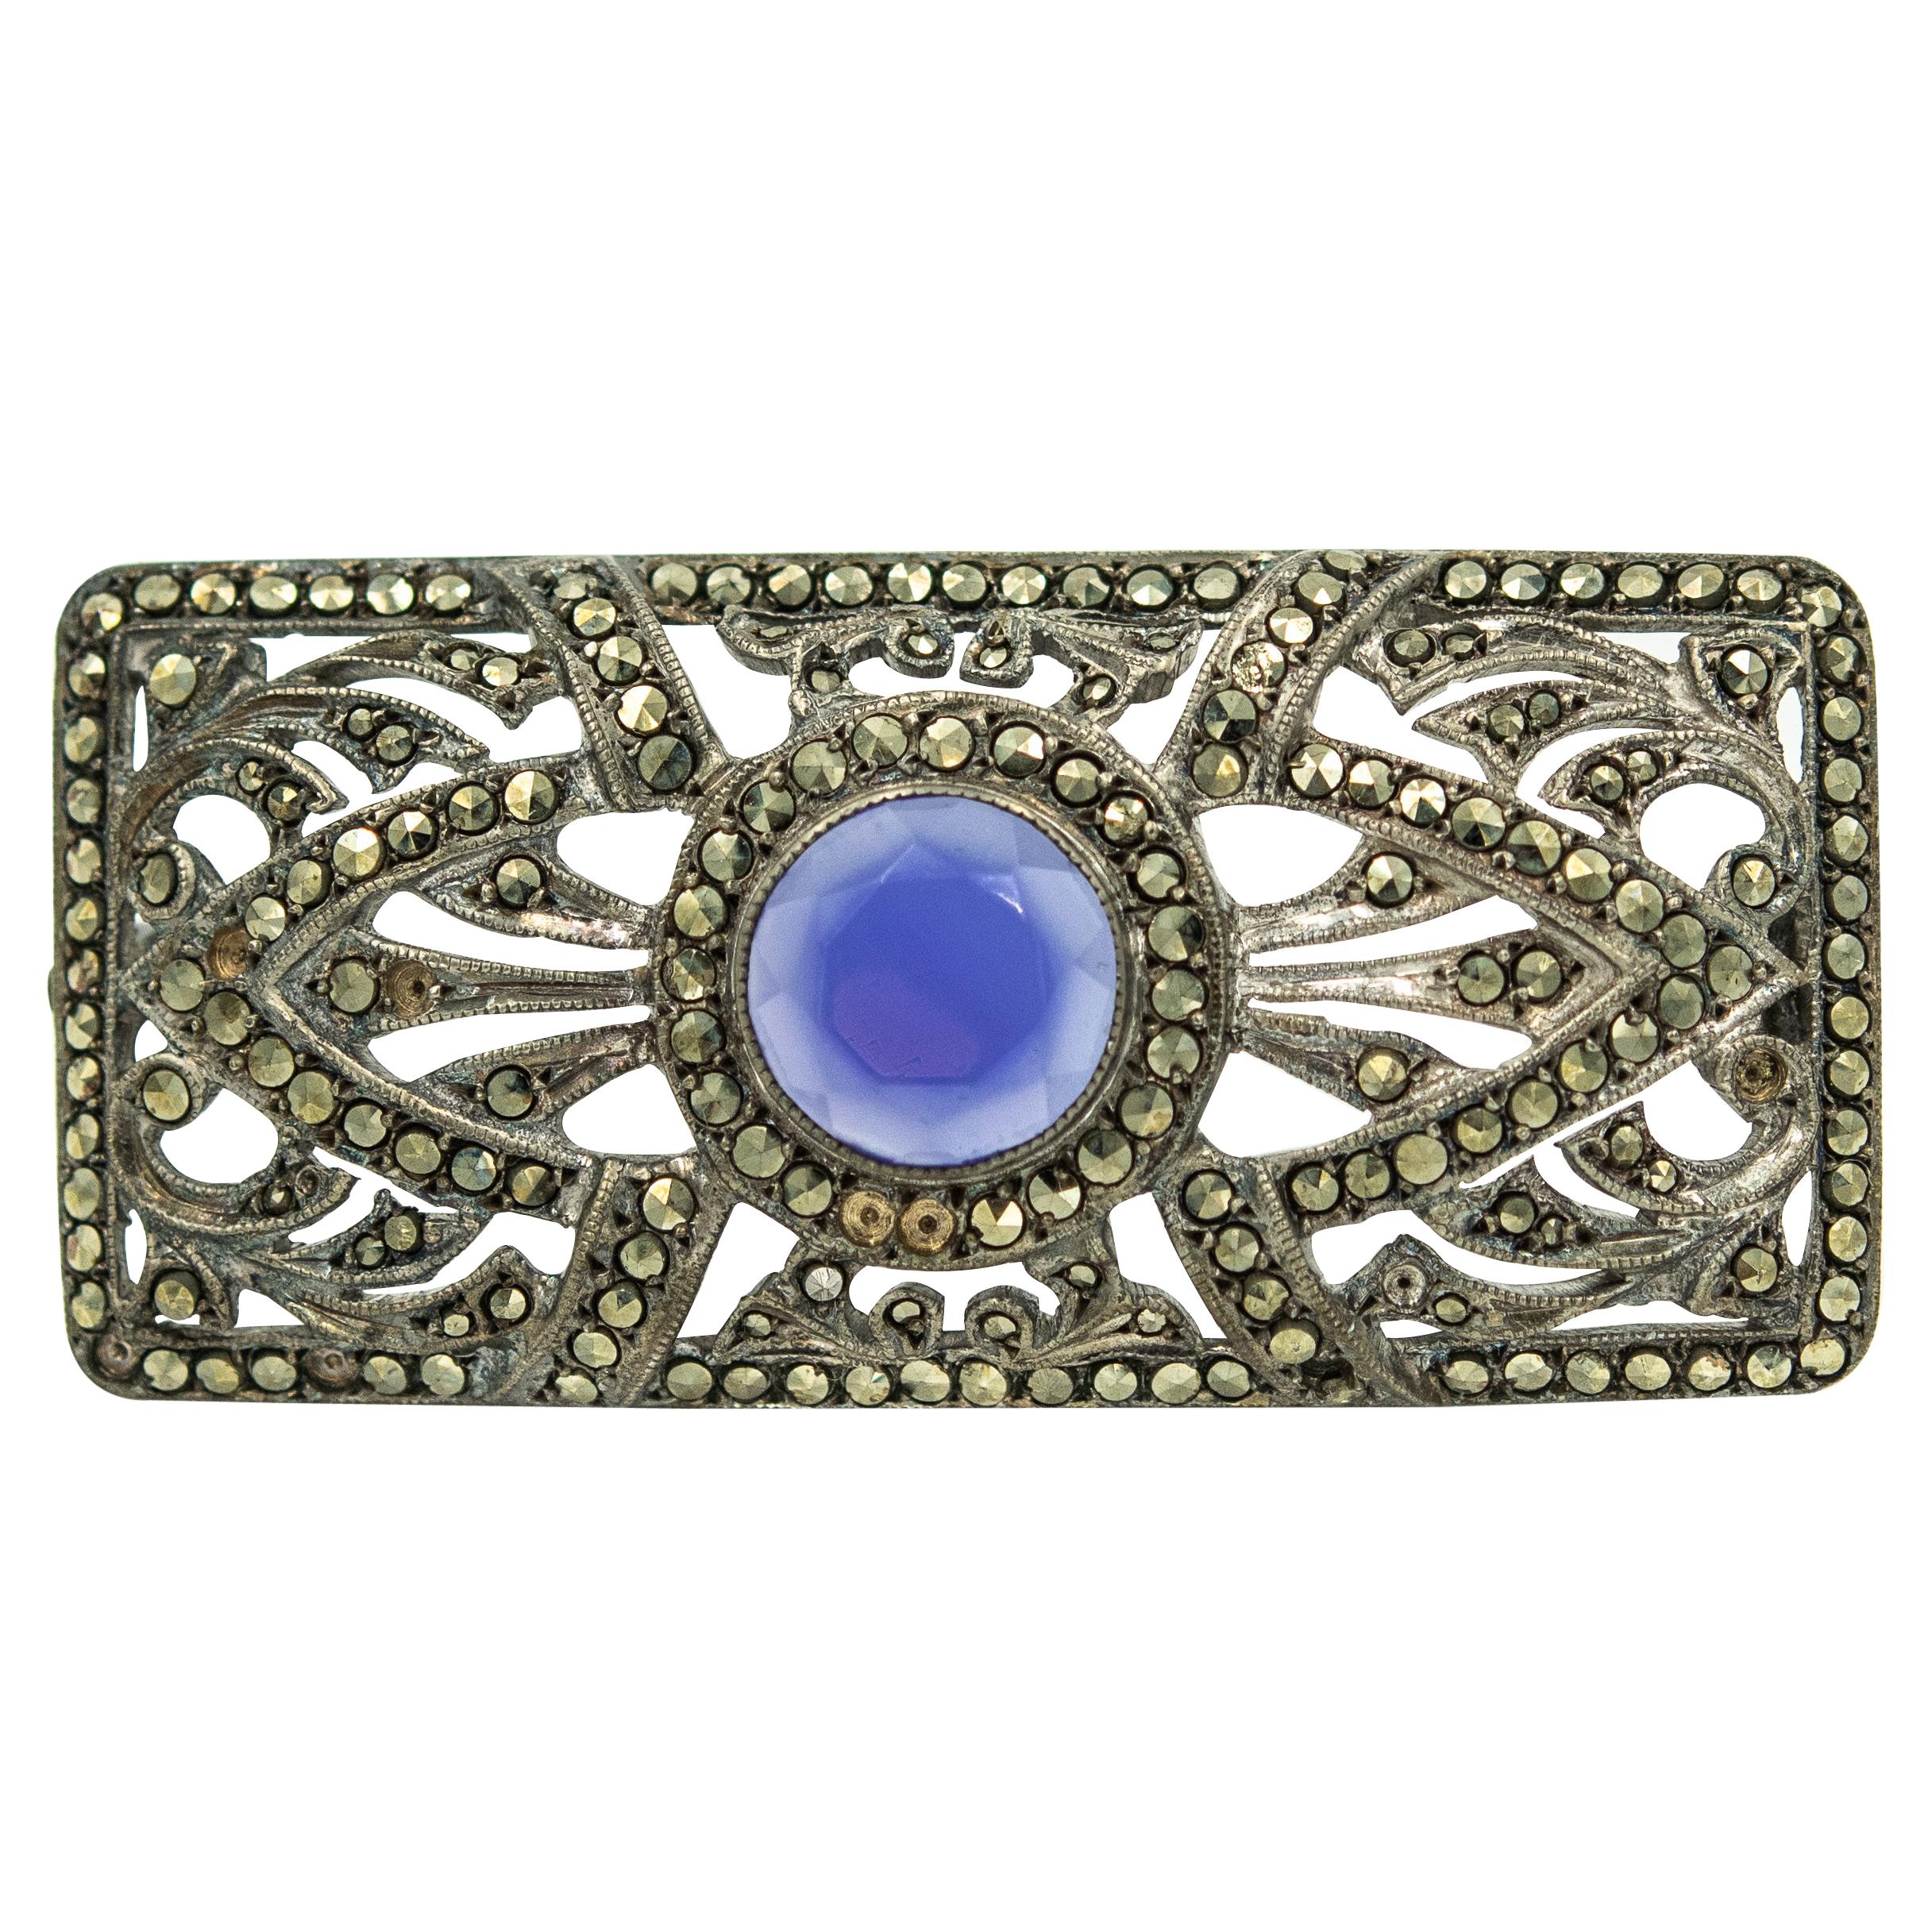 Antique Art Deco Marcasite Silver Openwork Brooch with Blue Center Stone